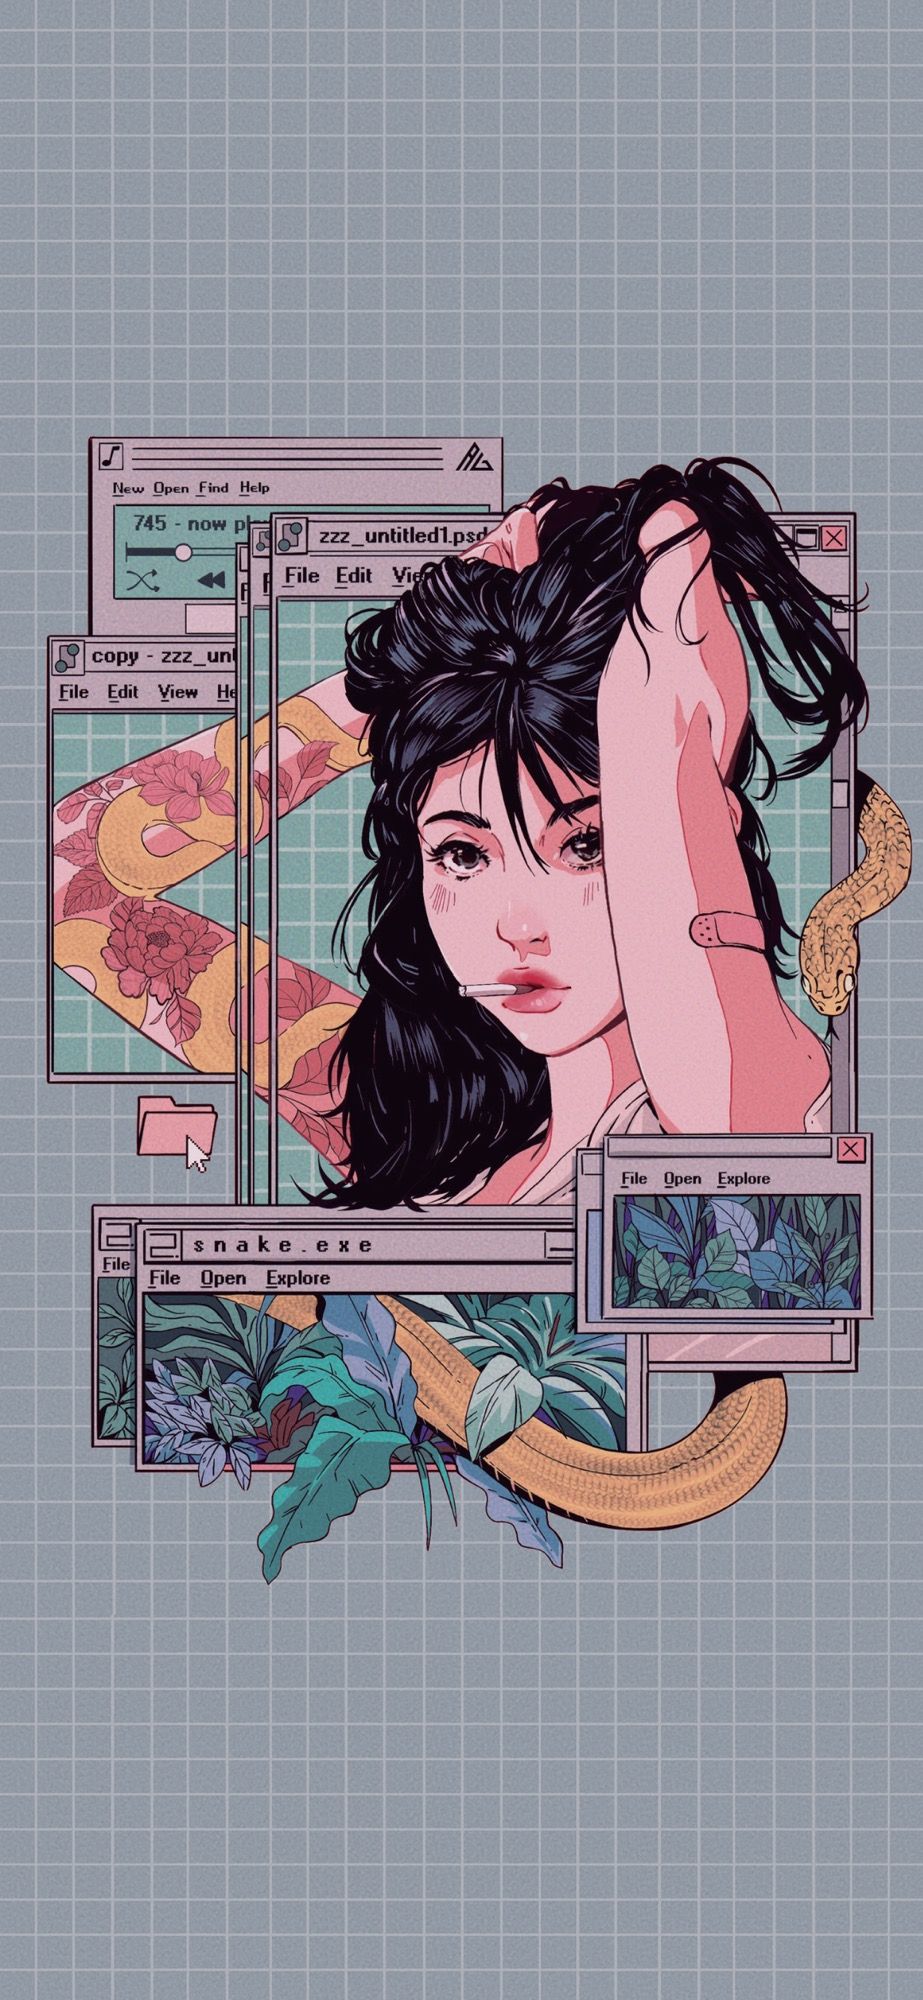 I made an illustration inspired by 90s anime and Windows aesthetic, hope this belongs here